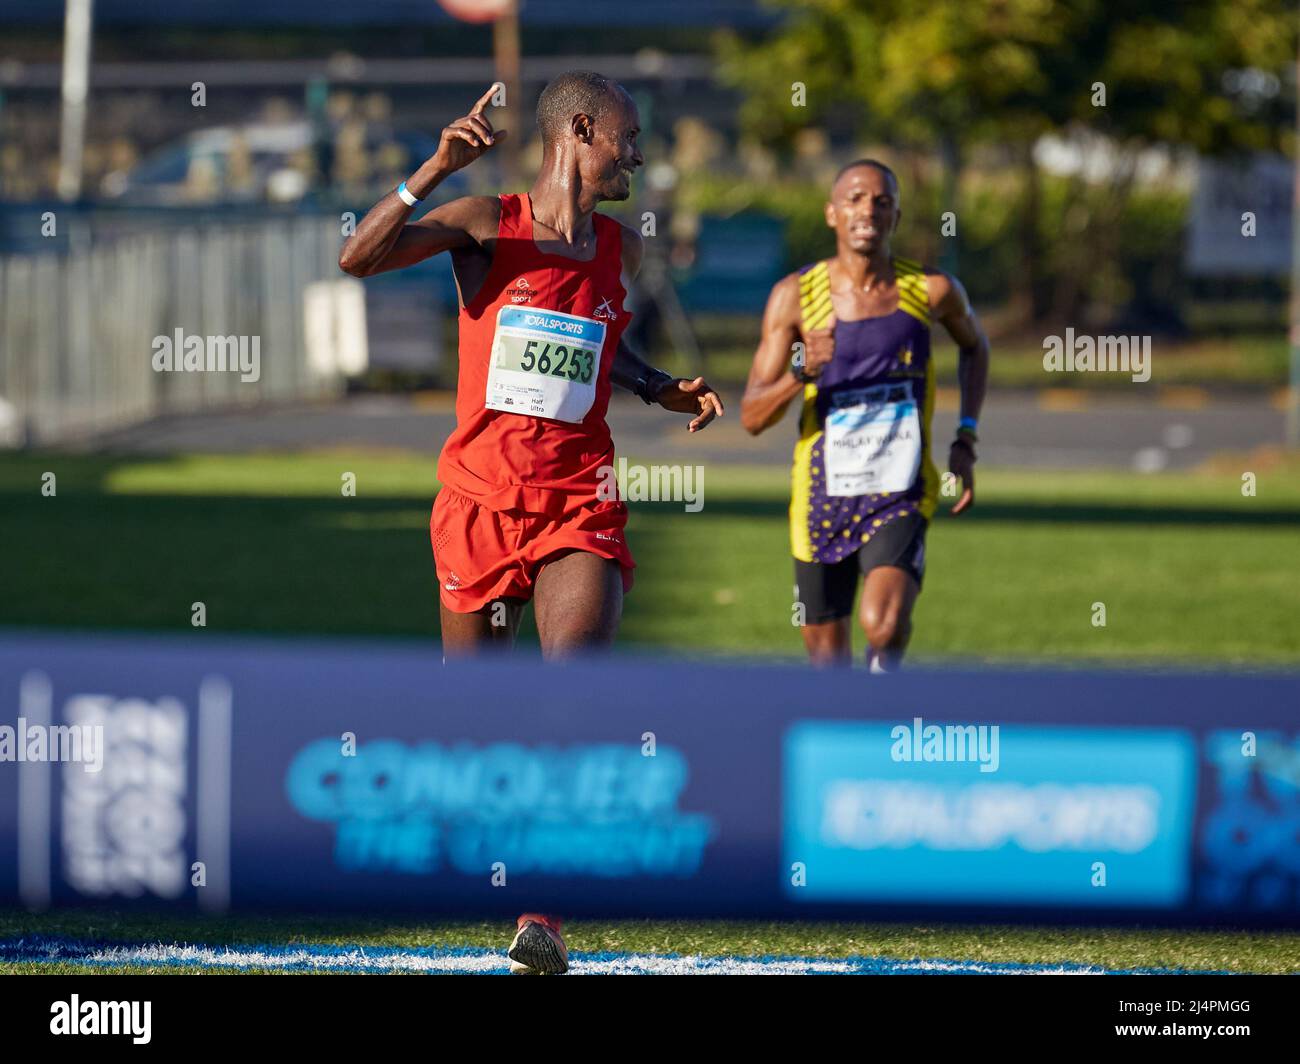 Cape Town, South Africa, 16th Apr 2022. Edndale Belachew, Mens Winner looks back at Nkosikhona Mhlakwana, in a sprint finish to the end. MO Bassa/Alamay Live News Stock Photo